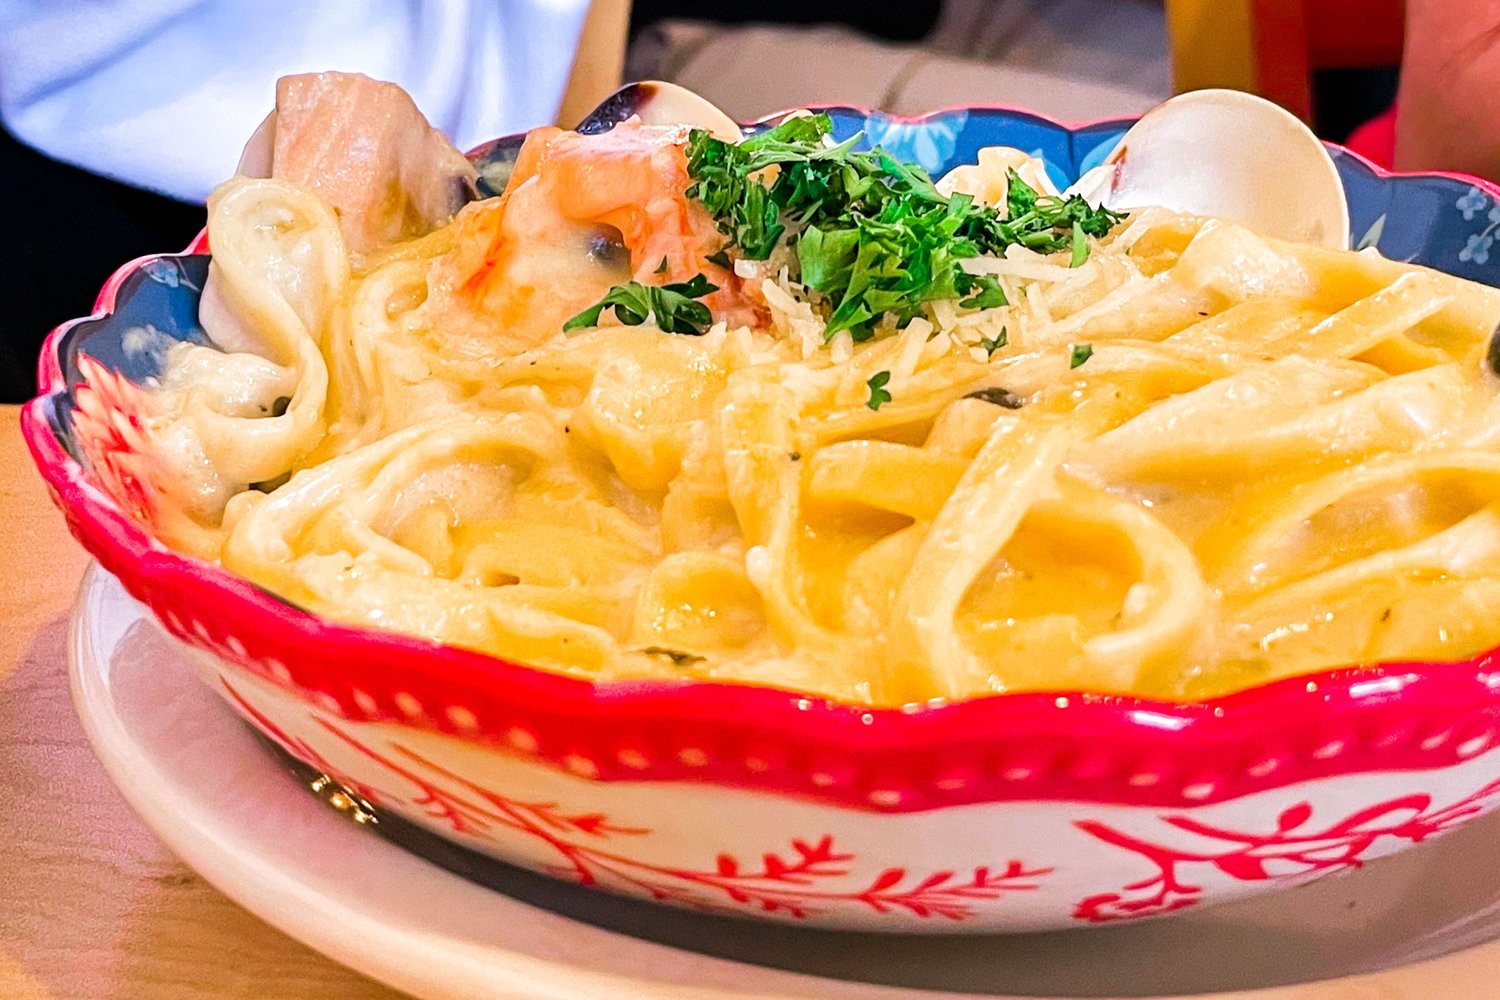 A bowl of noodles featuring seafood is served at The Pasta Bowl on a recent evening in Chehalis.